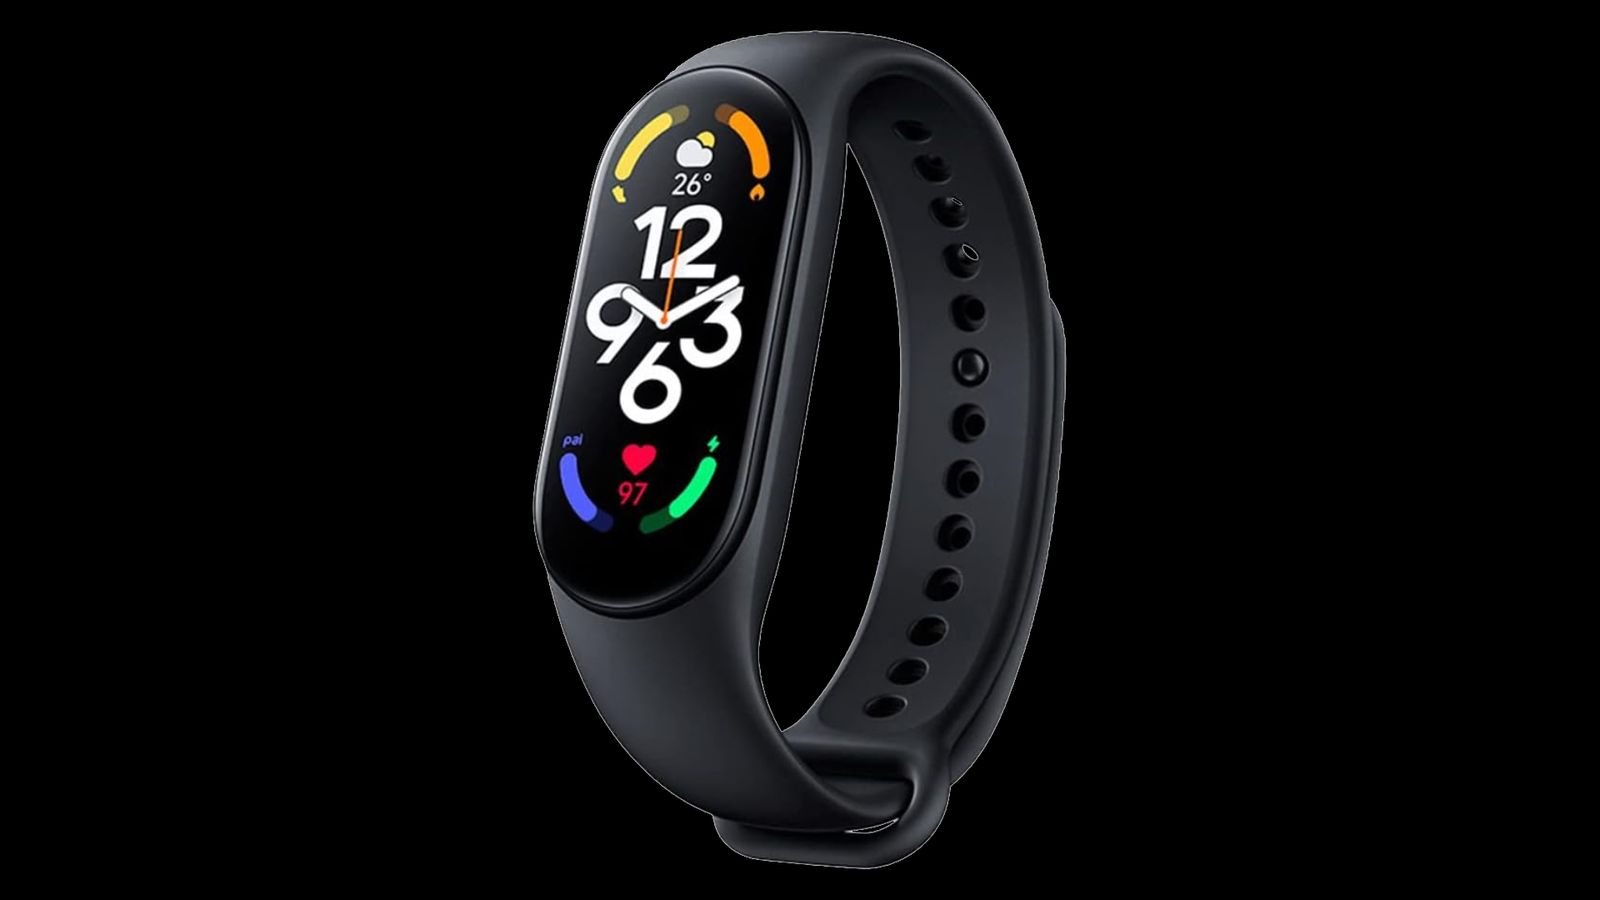 Best fitness trackers and watches - Xiaomi Mi Smart Band 7 product image of a black fitness tracker with the time in white on the display.